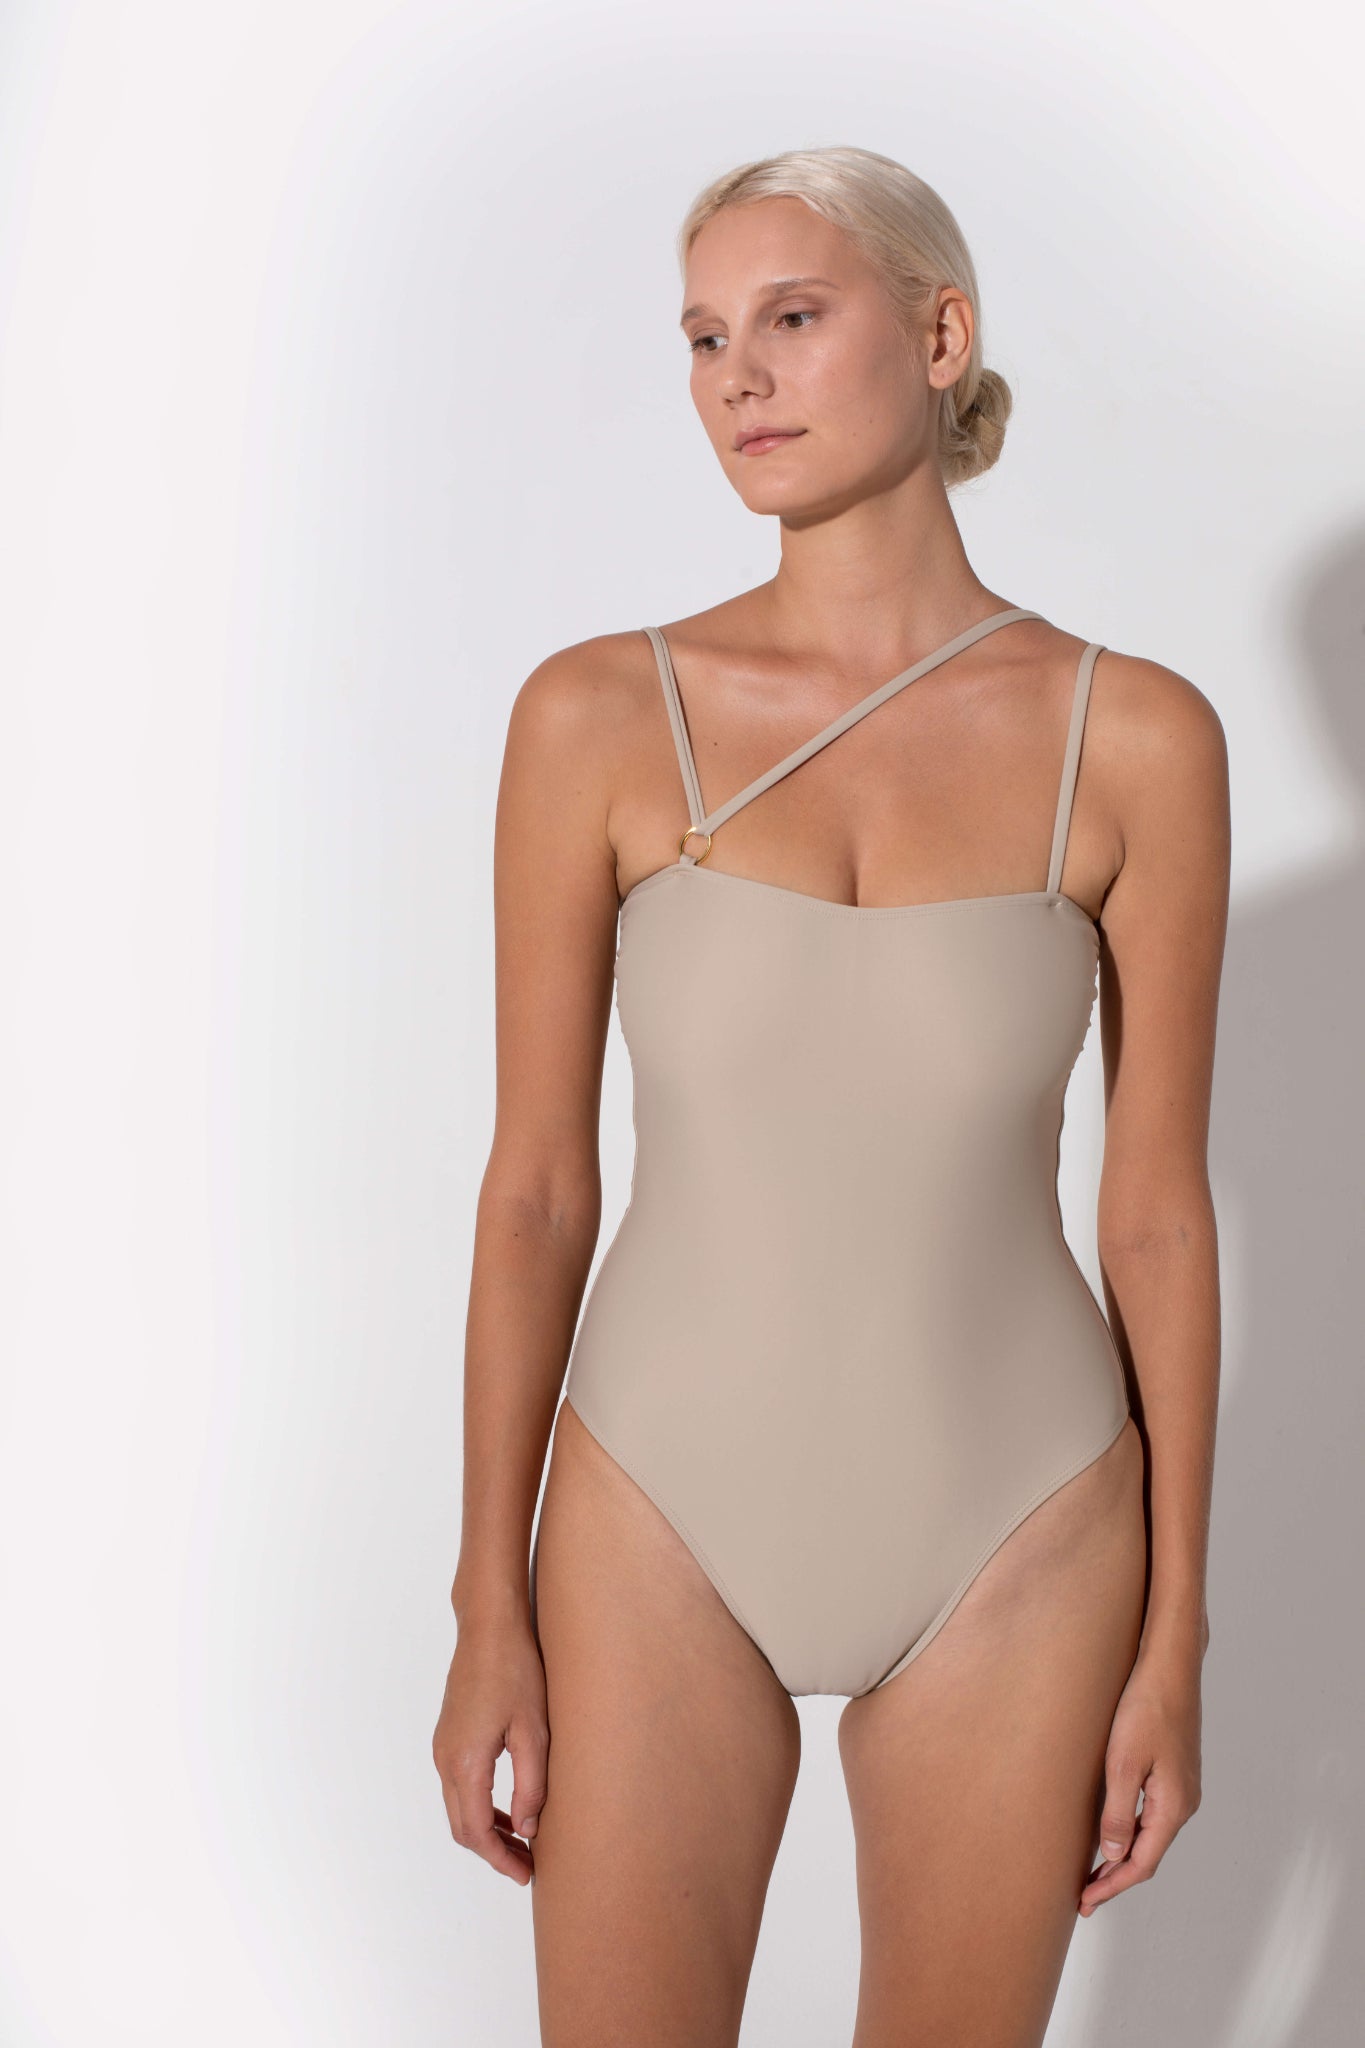 small bust swimsuits that flatter women with small chest and make legs long